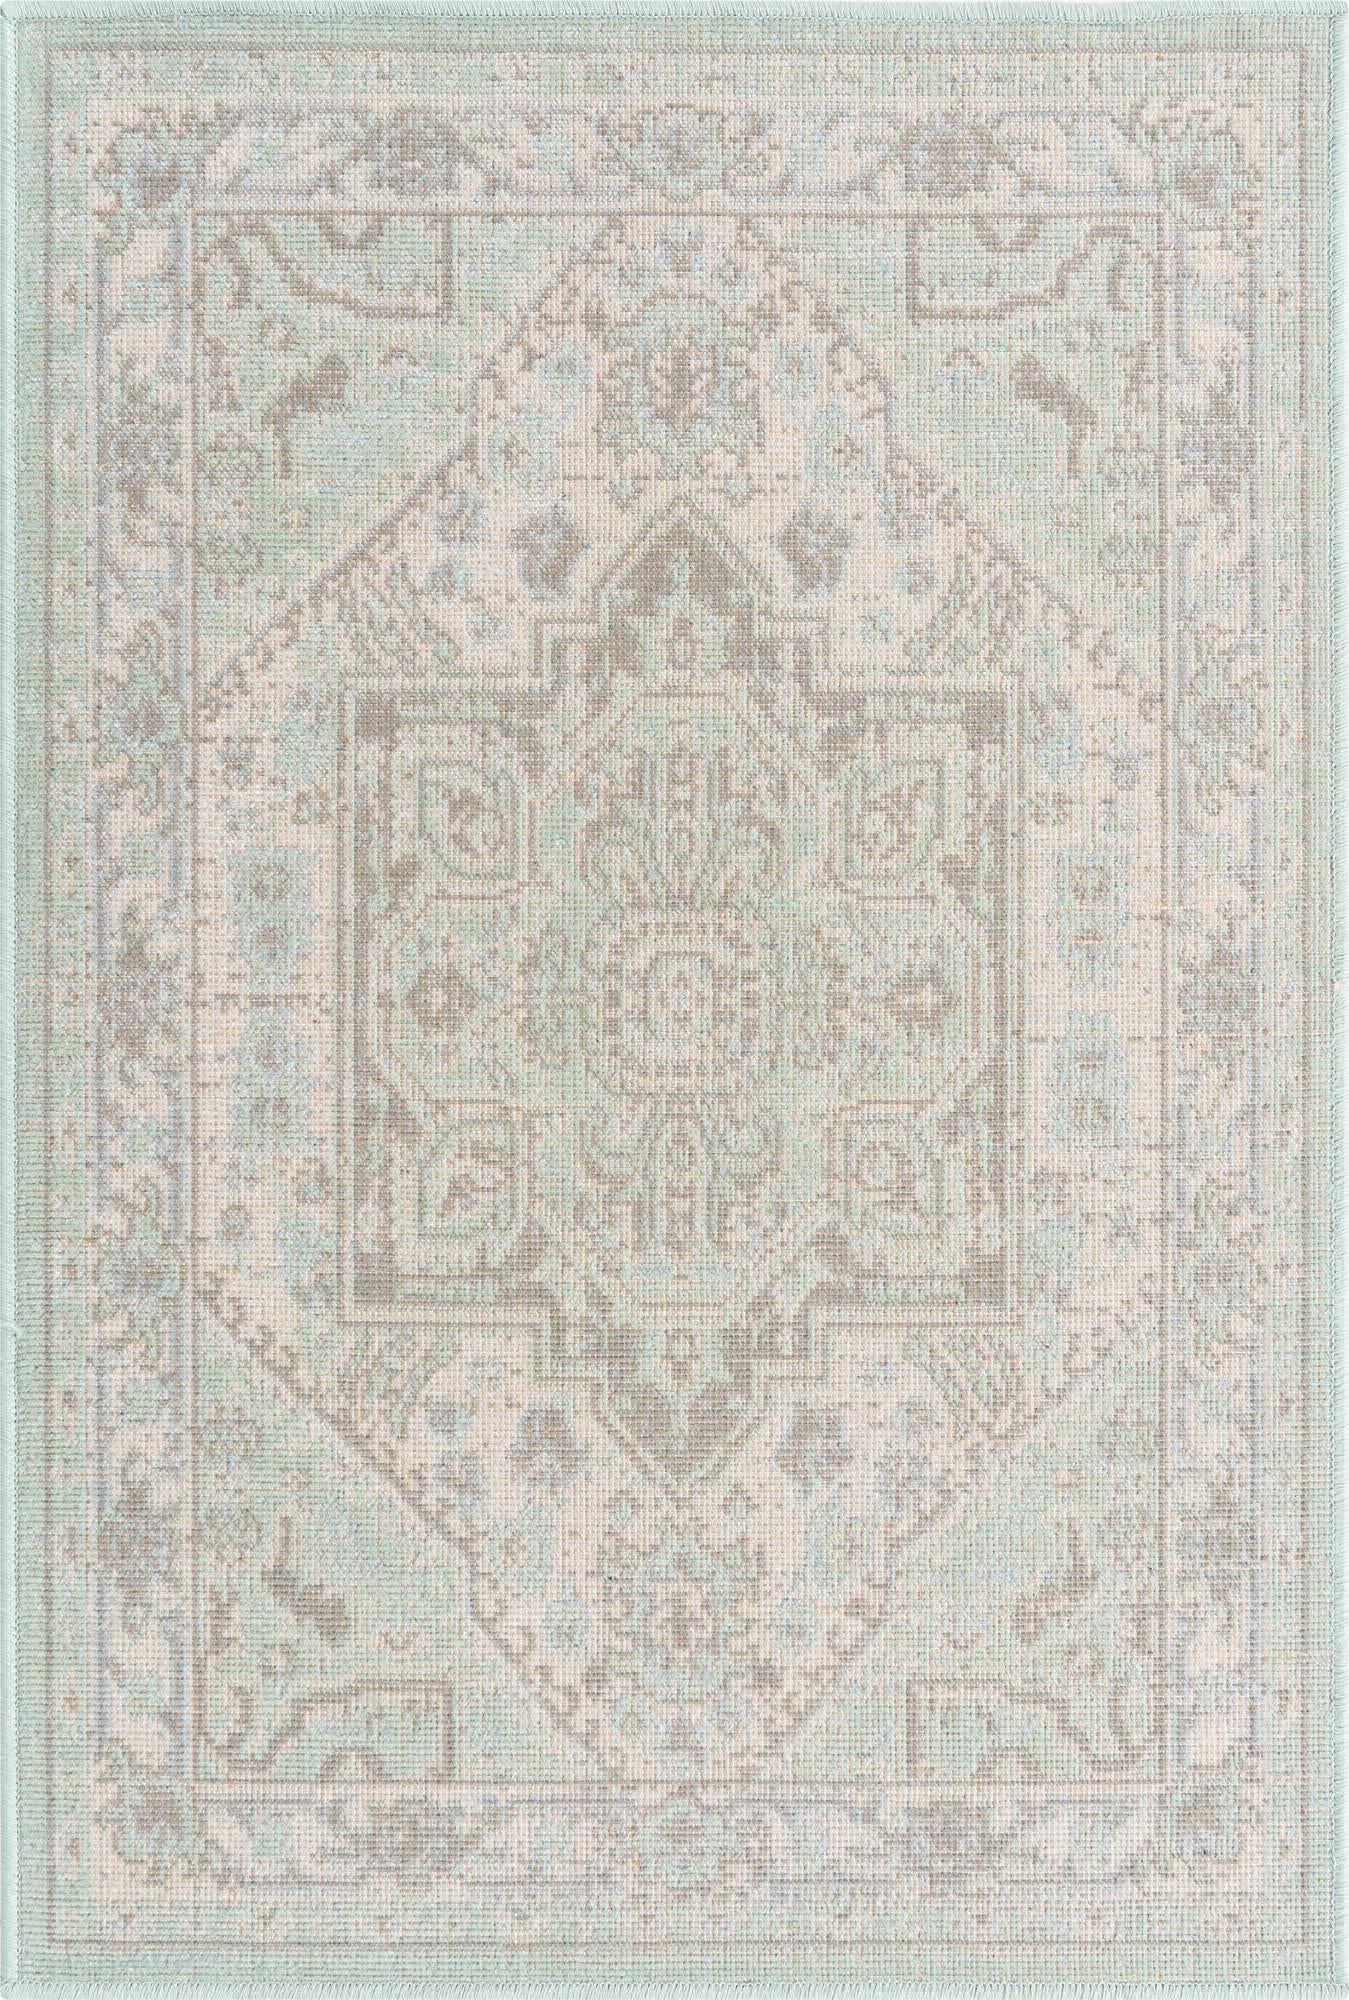 Unique Loom Whitney T-WHIT1 Mint Area Rug main image